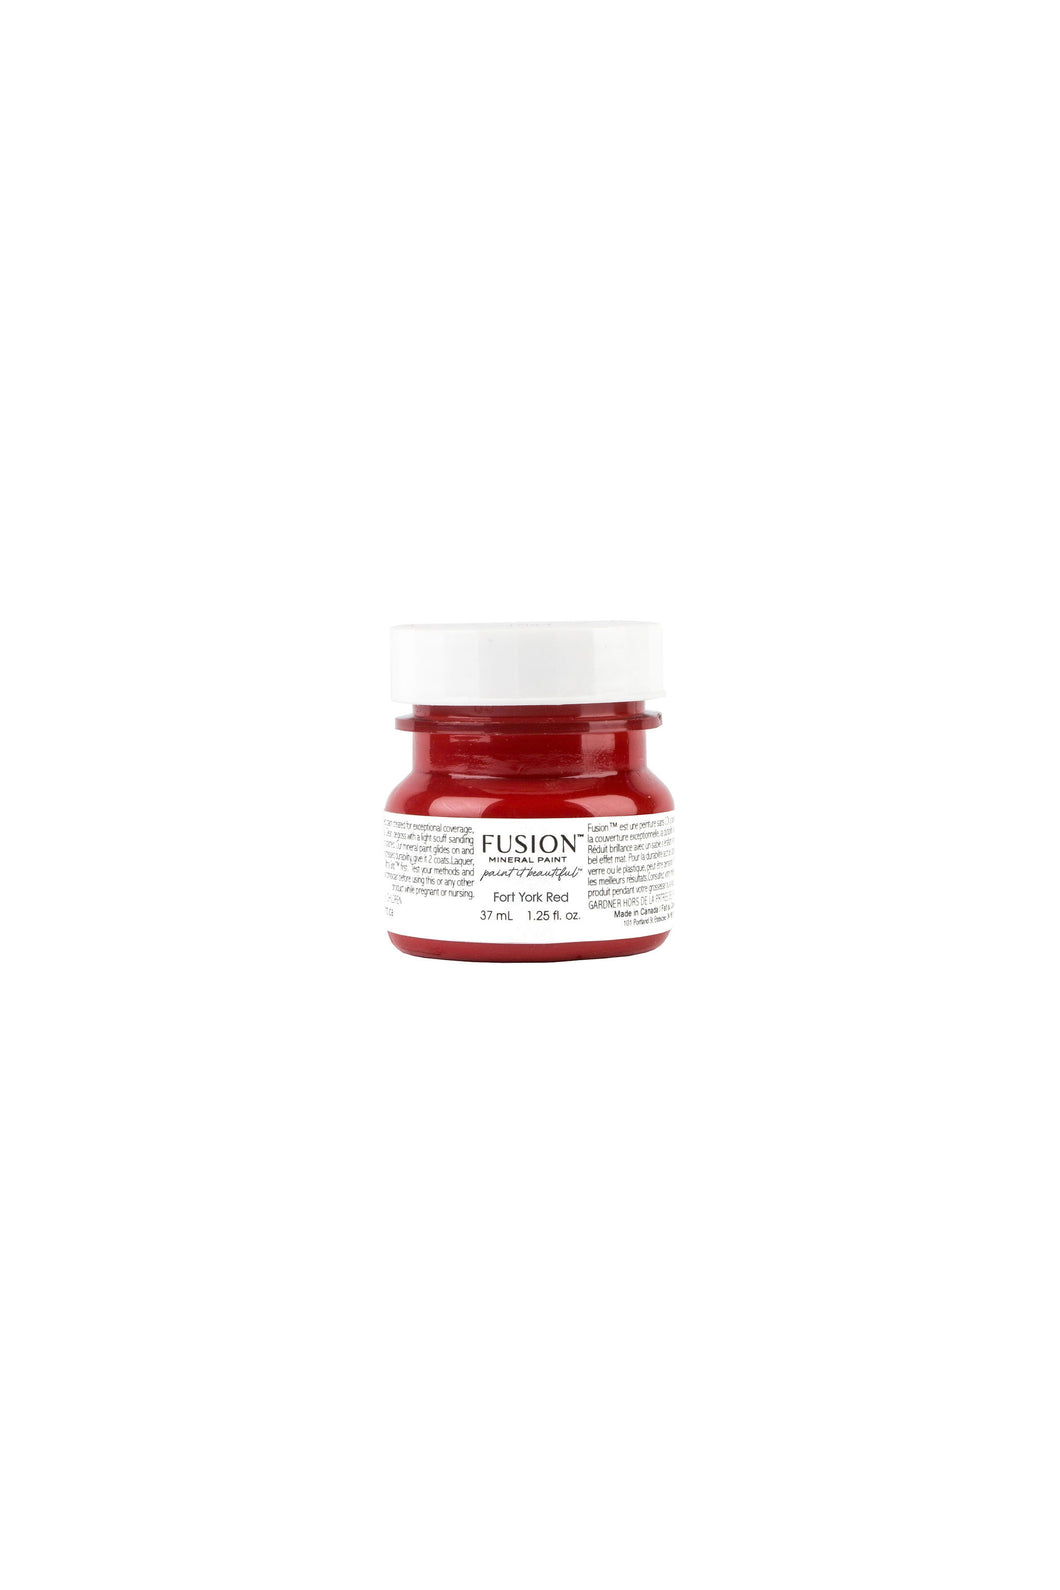 Fusion Mineral Paint - Fort York Red 37  ml Jar